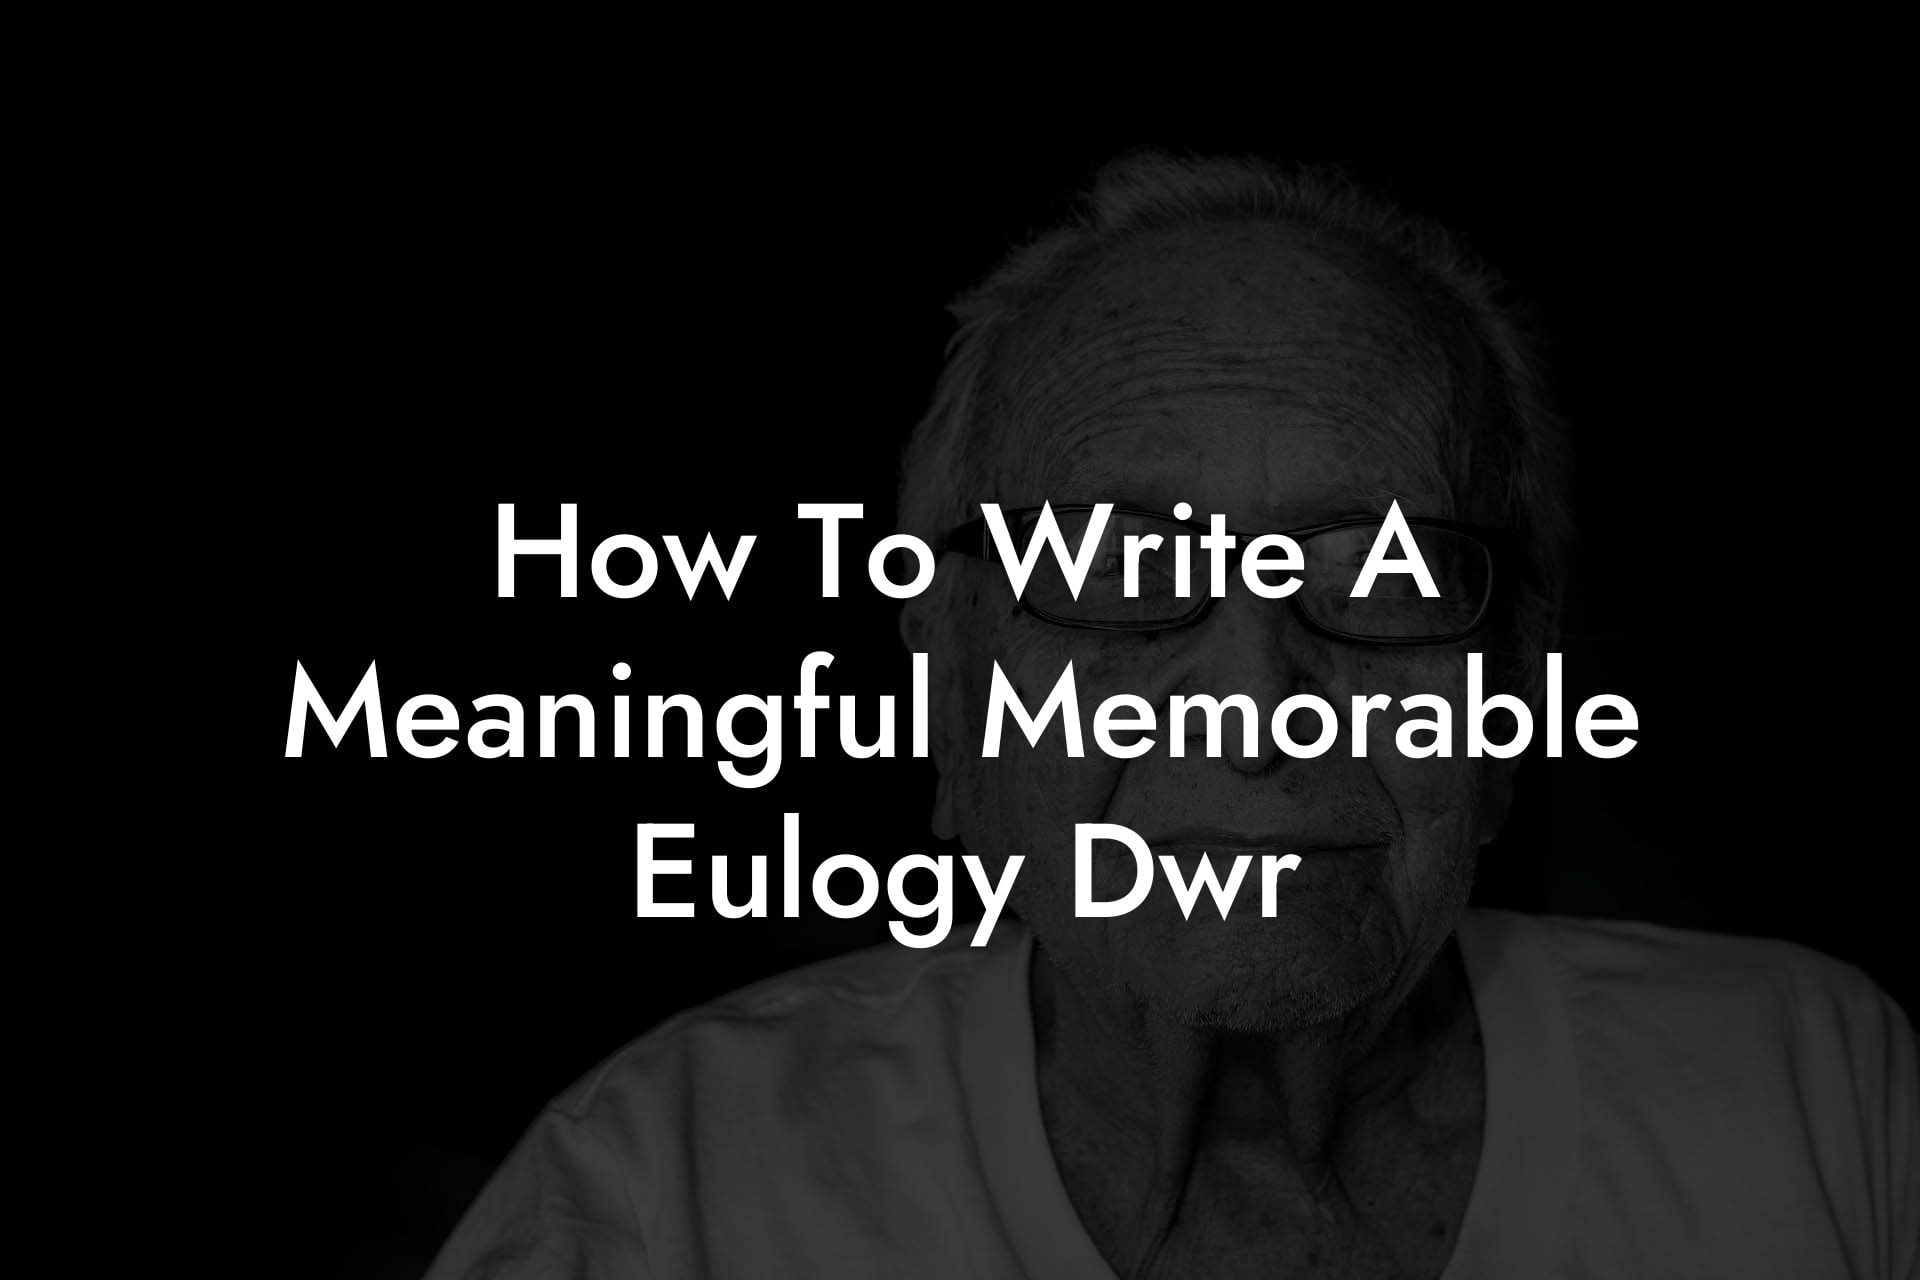 How To Write A Meaningful Memorable Eulogy Dwr